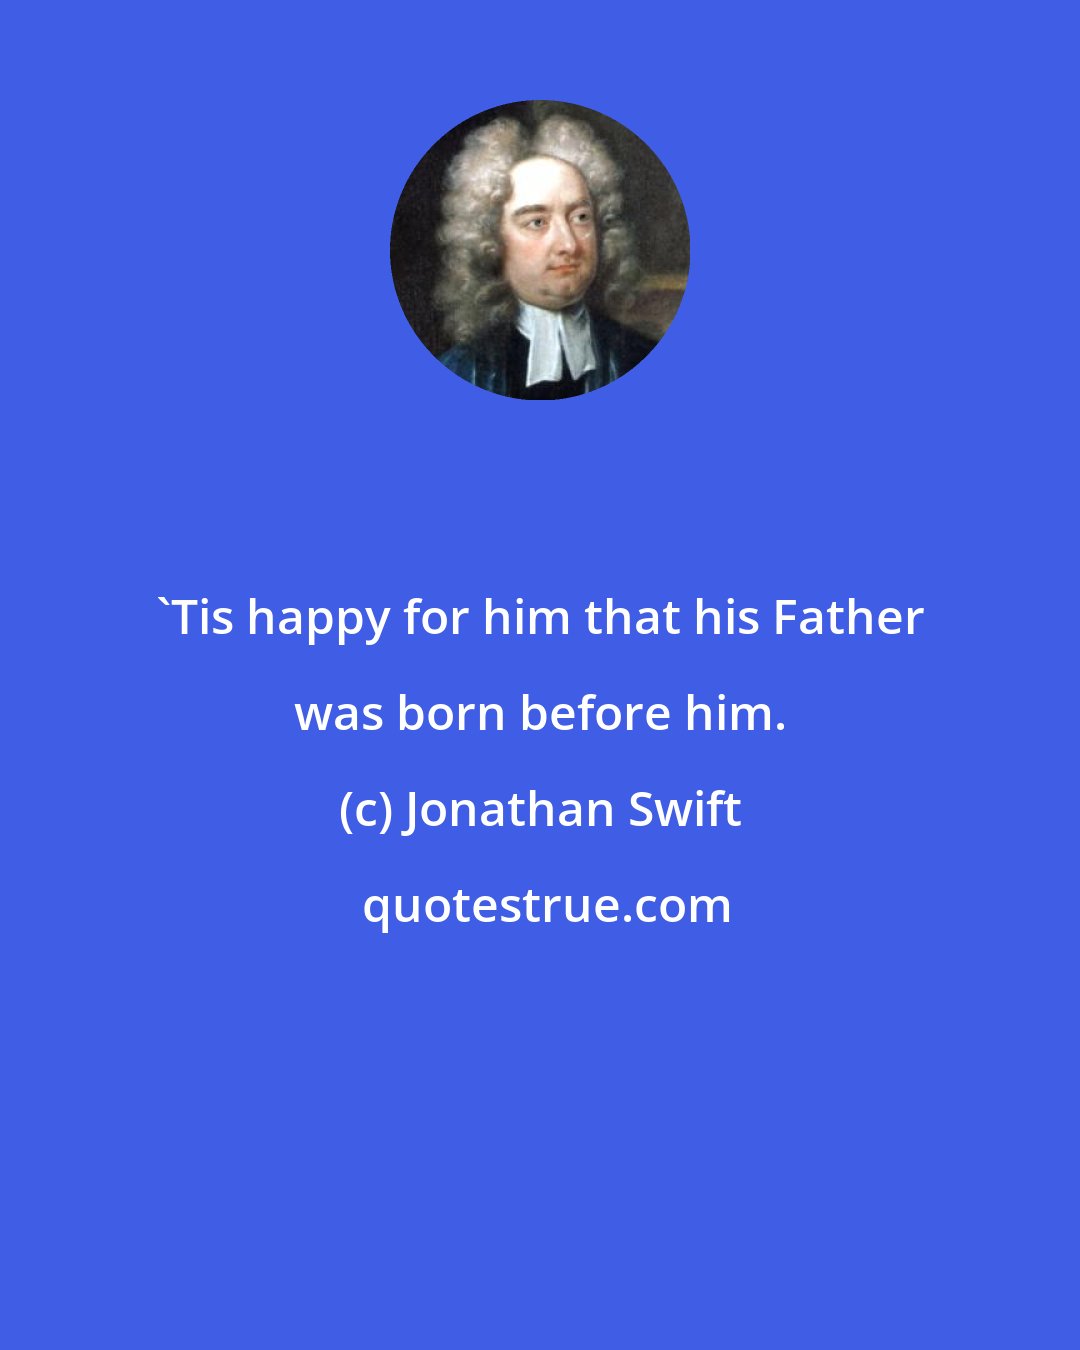 Jonathan Swift: 'Tis happy for him that his Father was born before him.